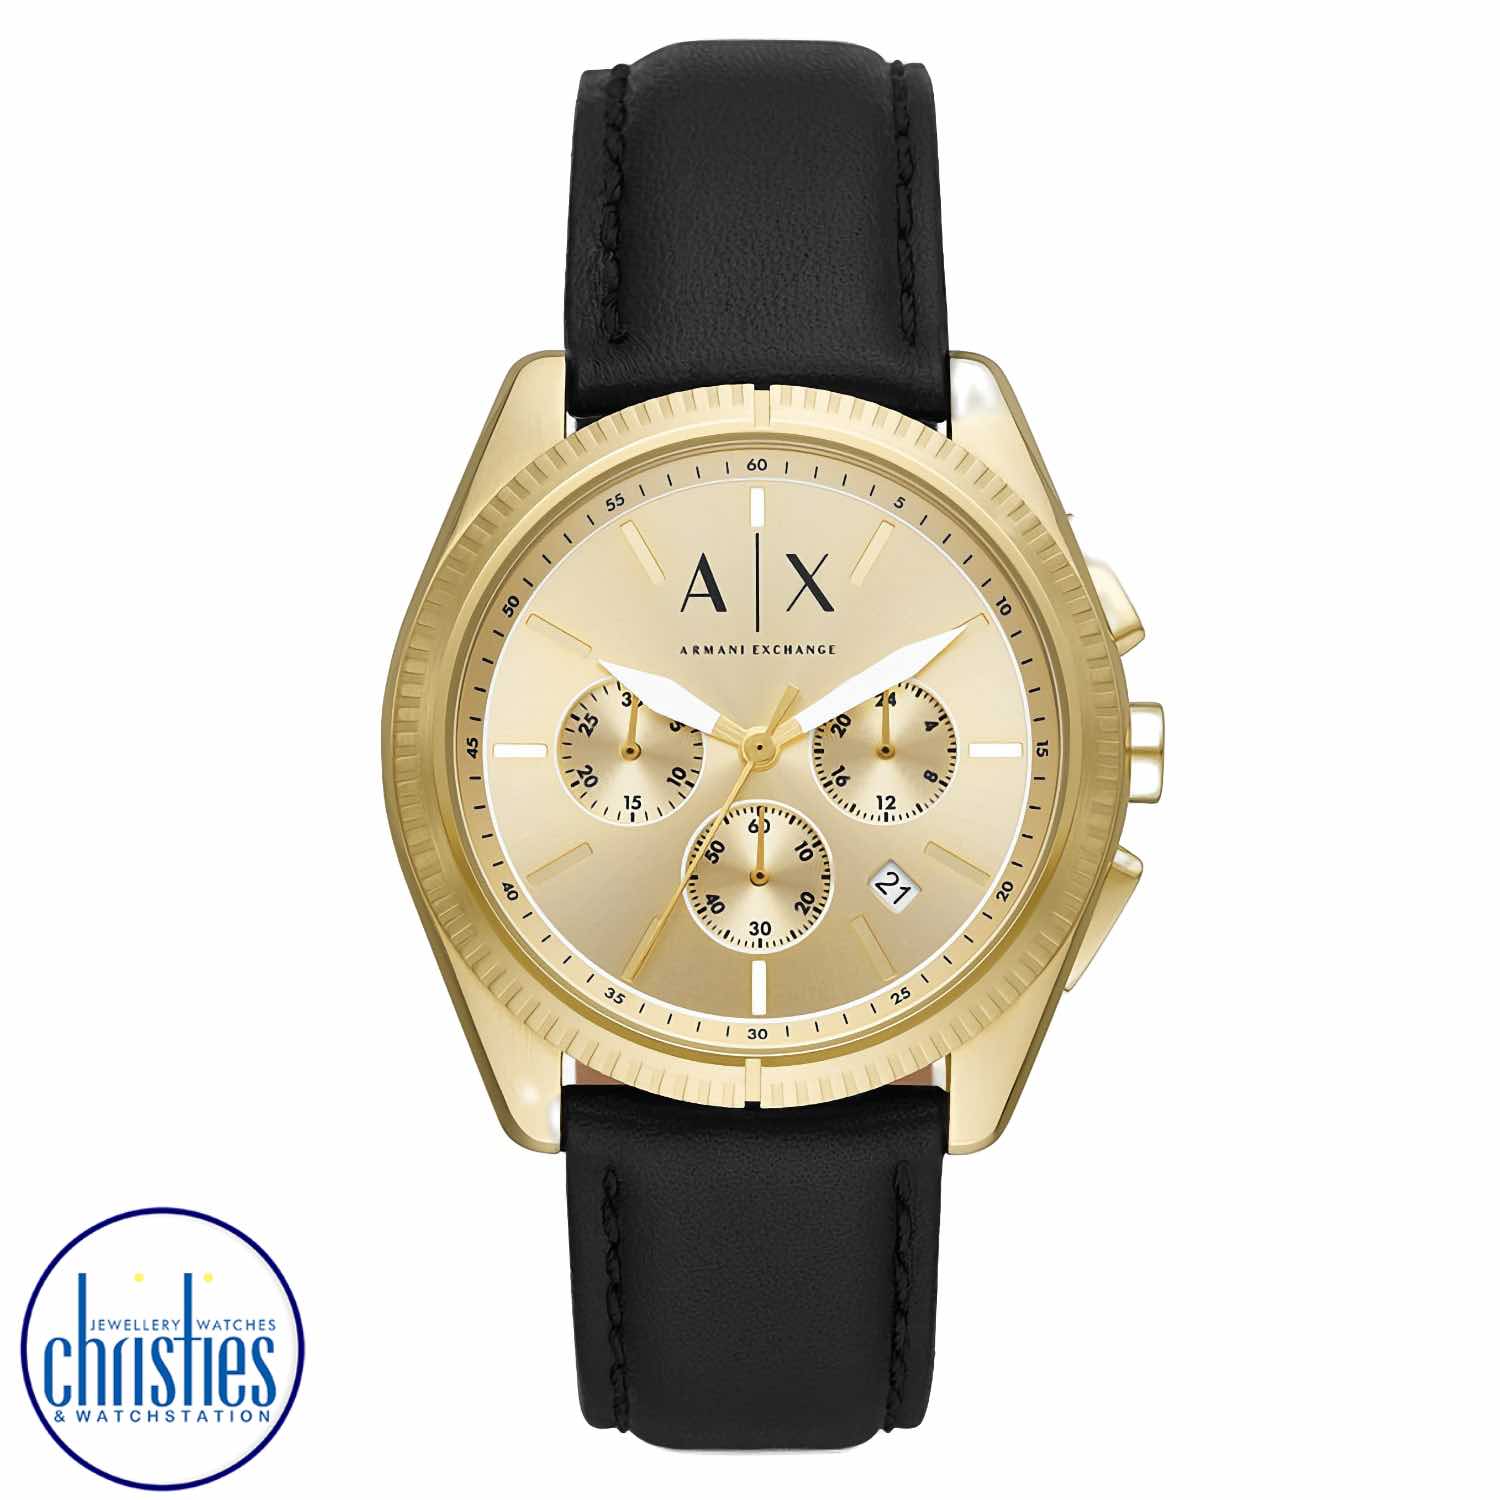 AX2861 A|X Armani Exchange Chronograph Black Leather Watch. AX2861 A|X Armani Exchange Chronograph Black Leather WatchAfterpay - Split your purchase into 4 instalments - Pay for your purchase over 4 instalments, due every two weeks.